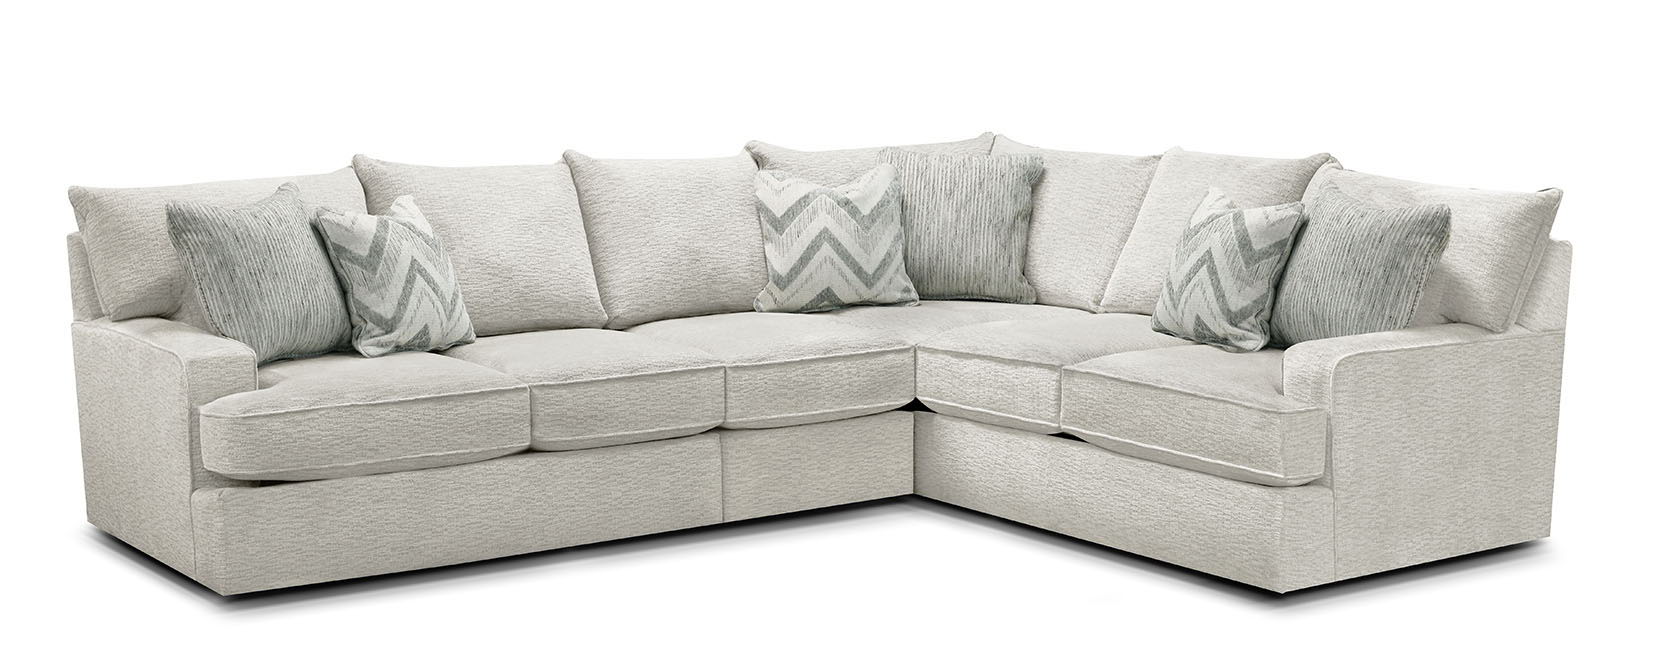 Anderson - 3300 - 3 PC Sectional